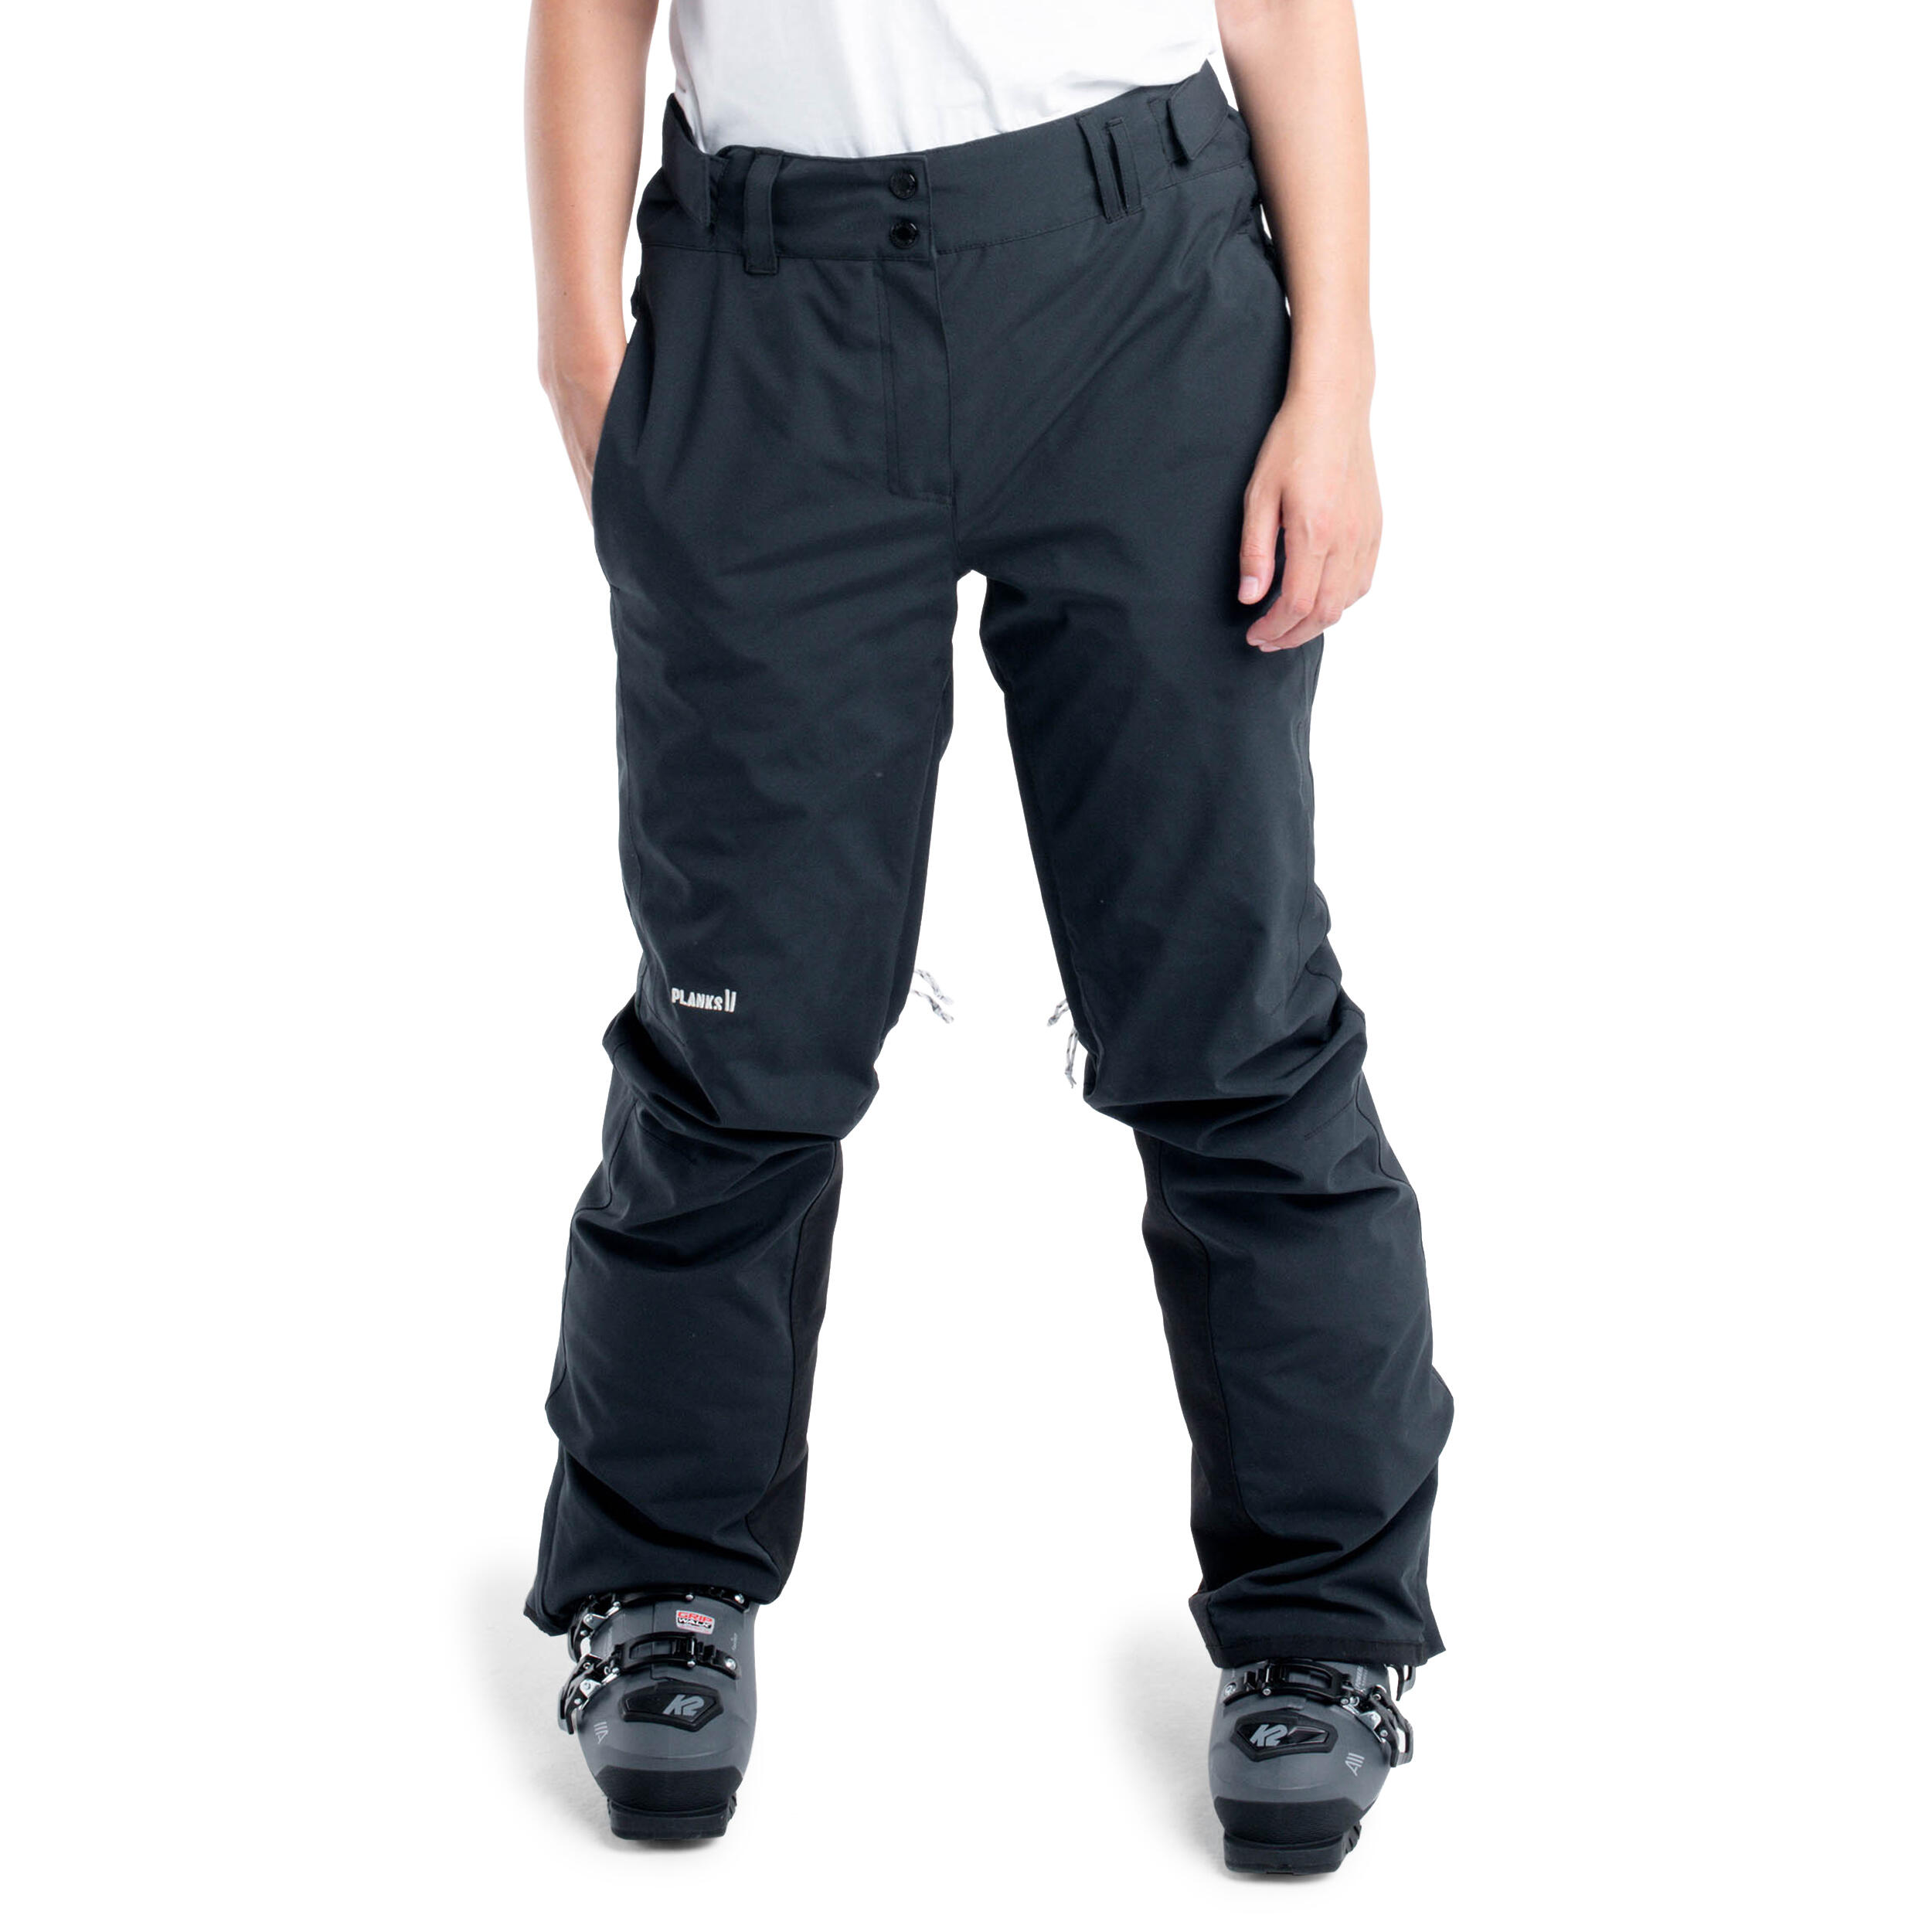 Planks All-Time Women's Insulated Pants in Black - Ladies Sports Trousers 1/3